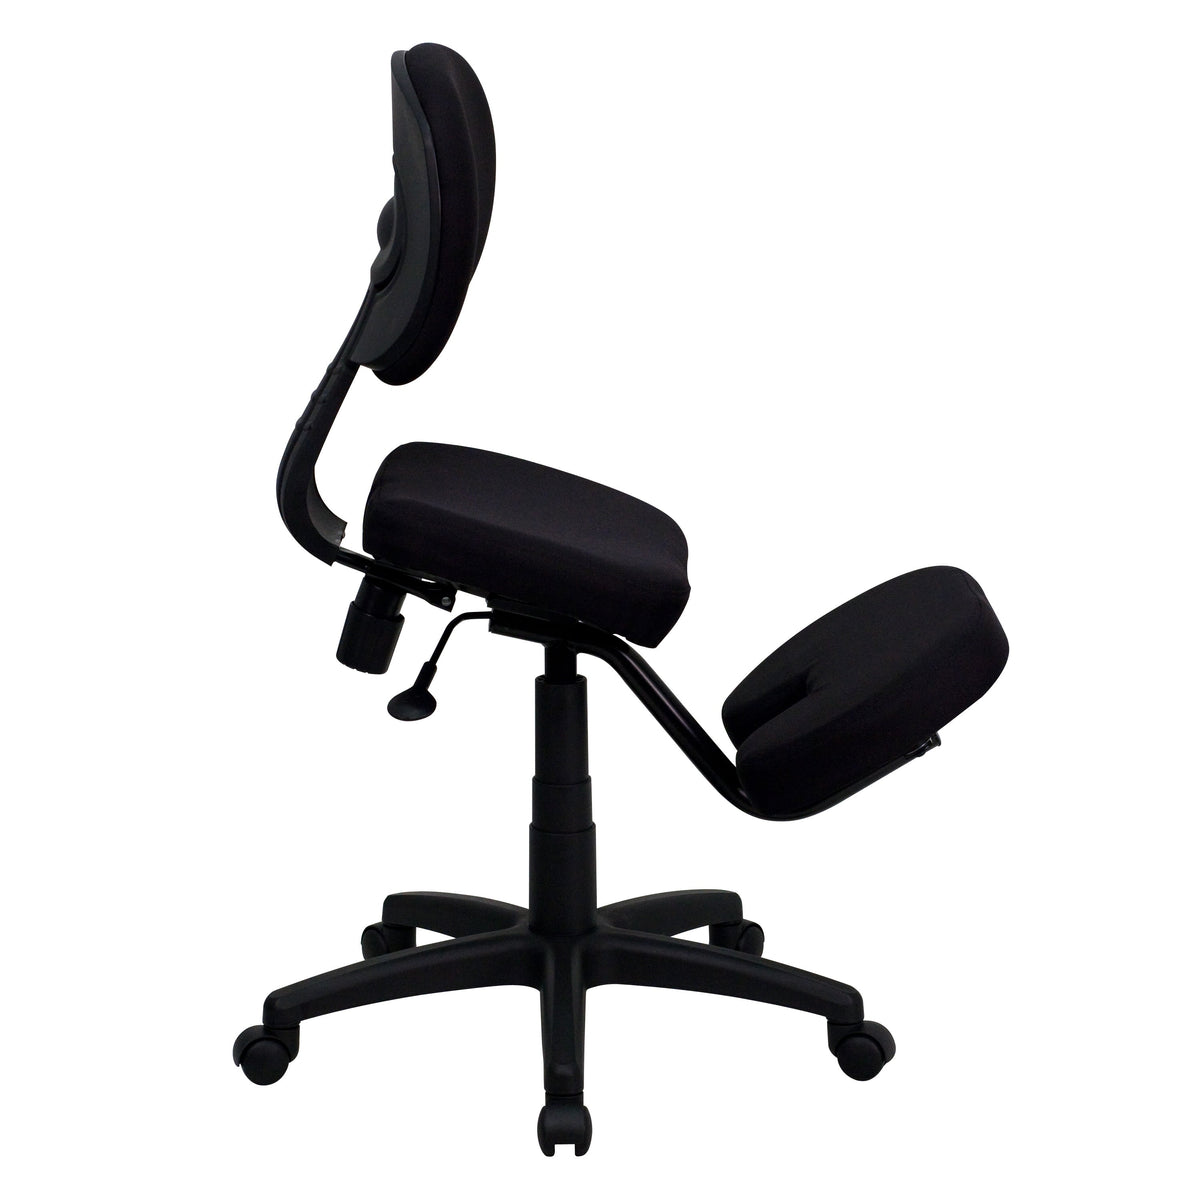 Mobile Ergonomic Kneeling Posture Task Office Chair with Back in Black Fabric